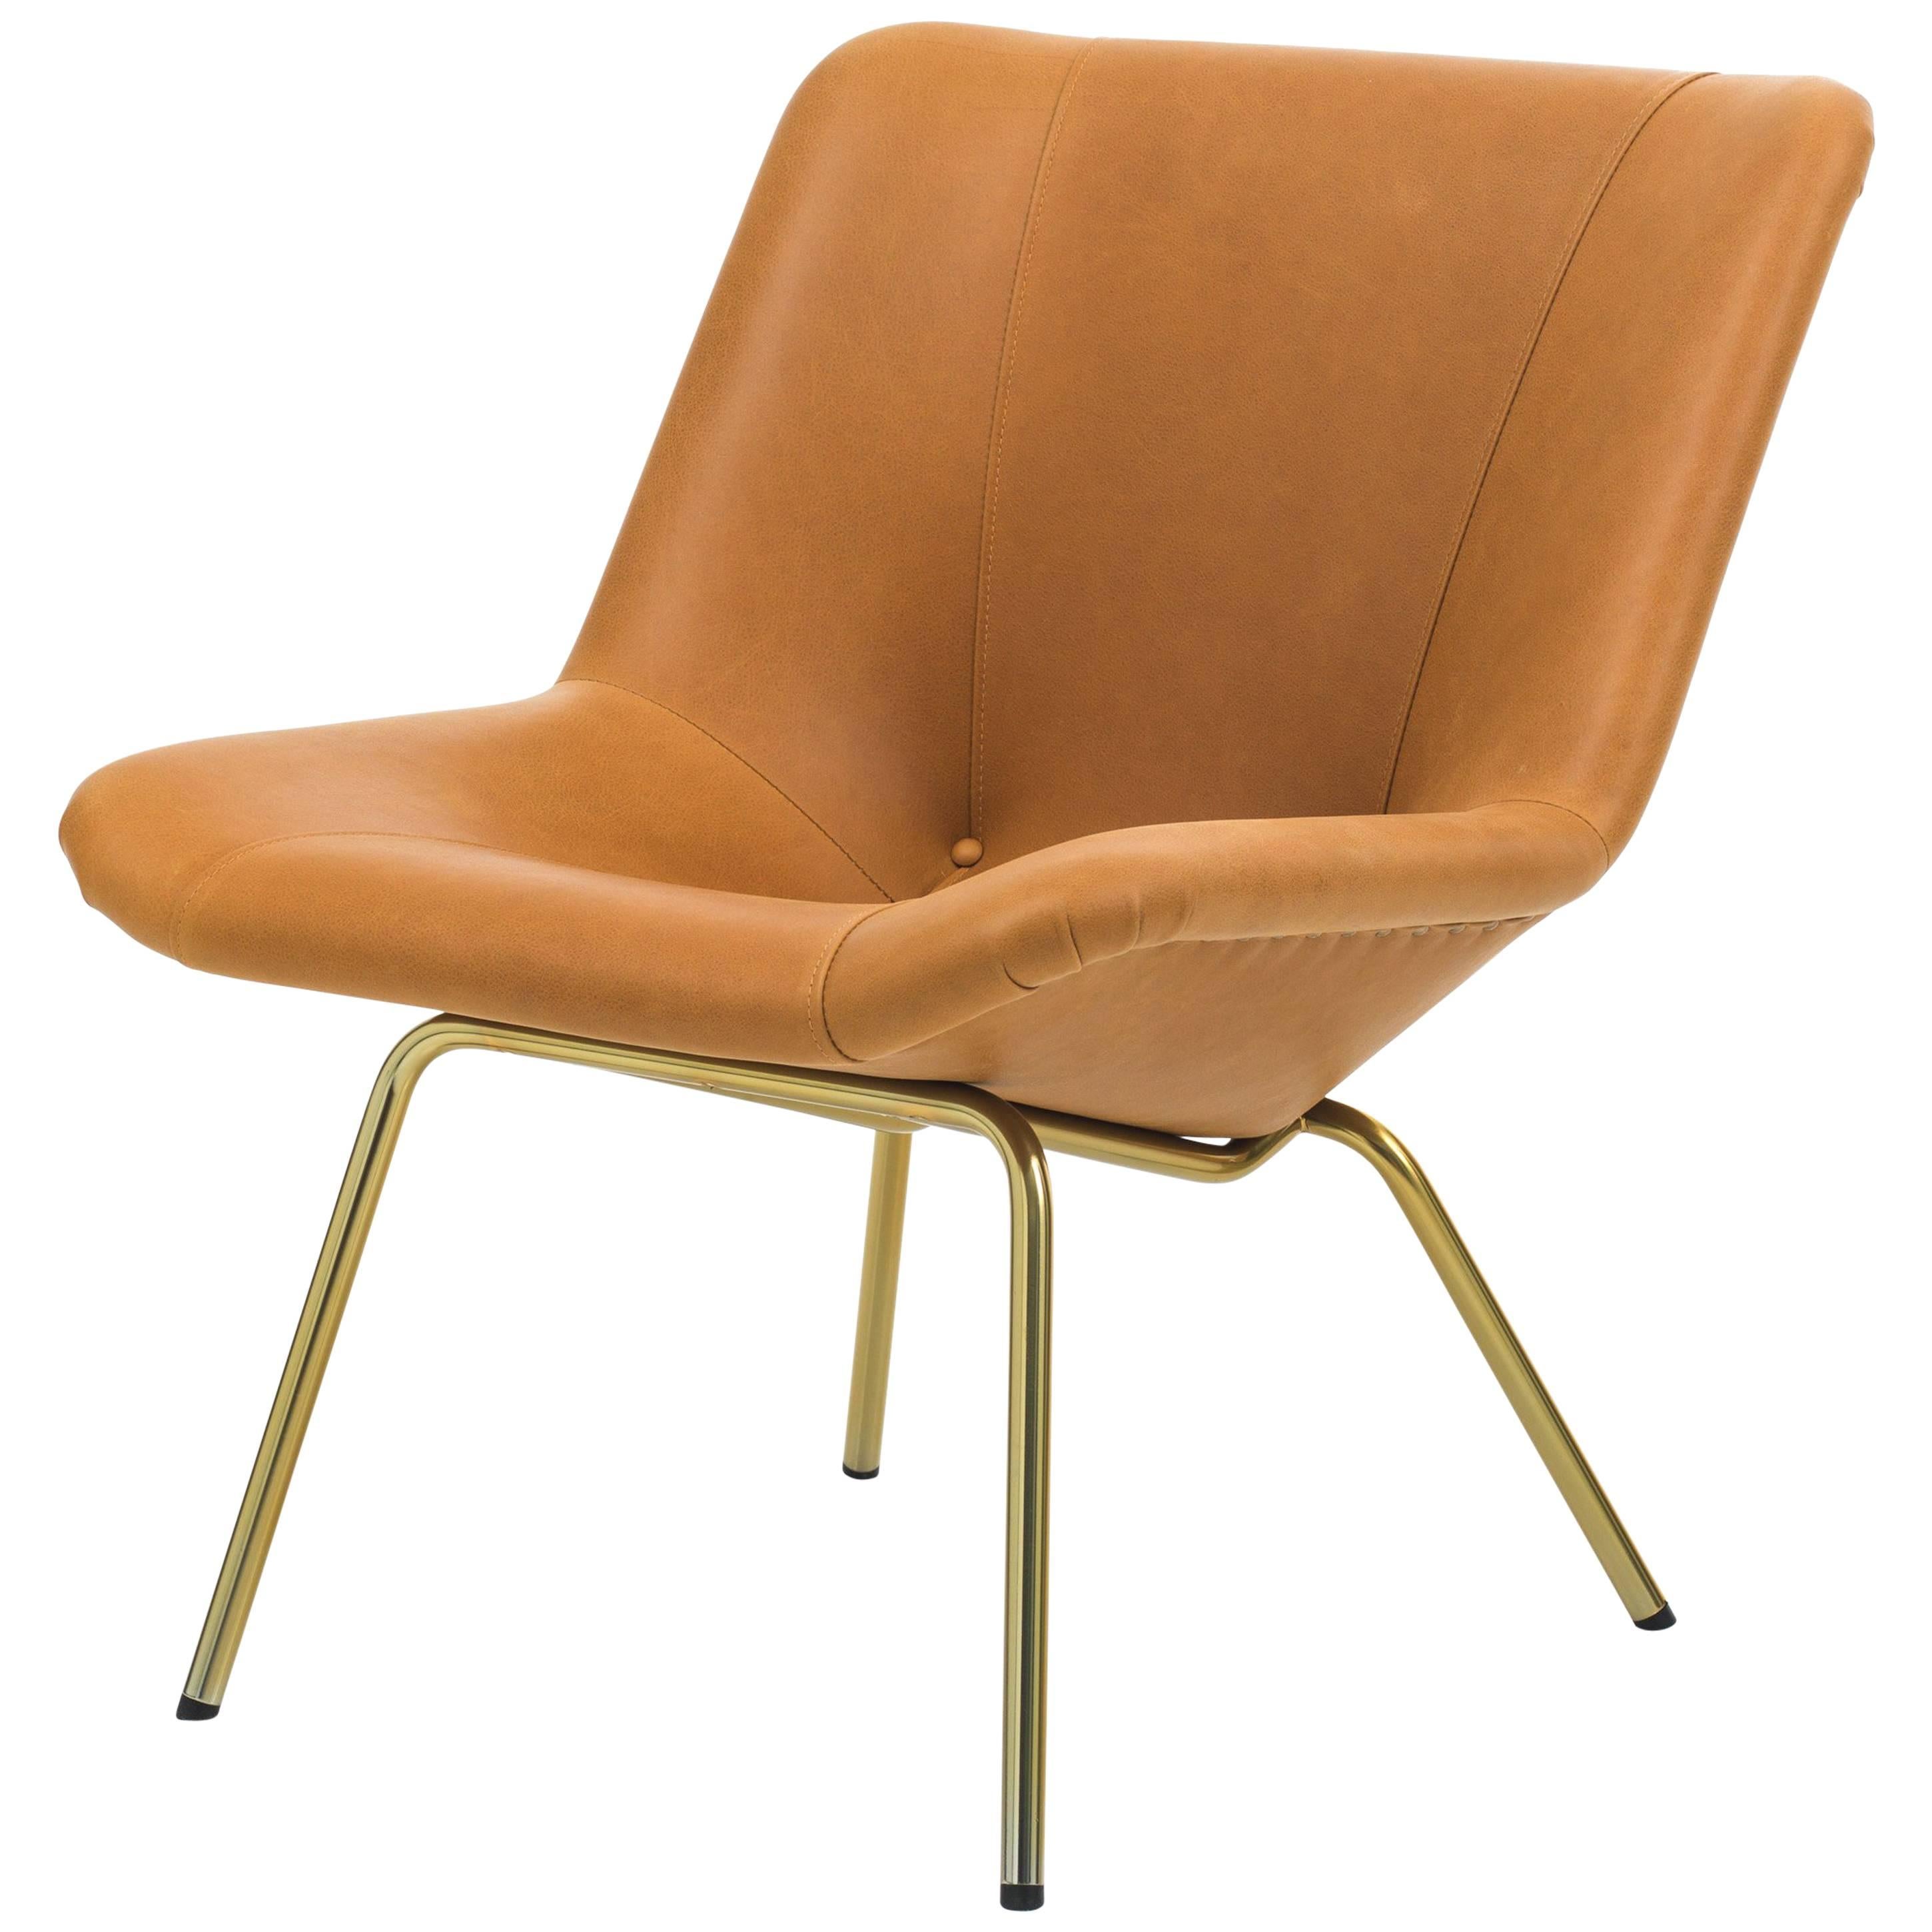 Lehti Chair in Leather by Carl Gustav Hiort af Ornäs For Sale